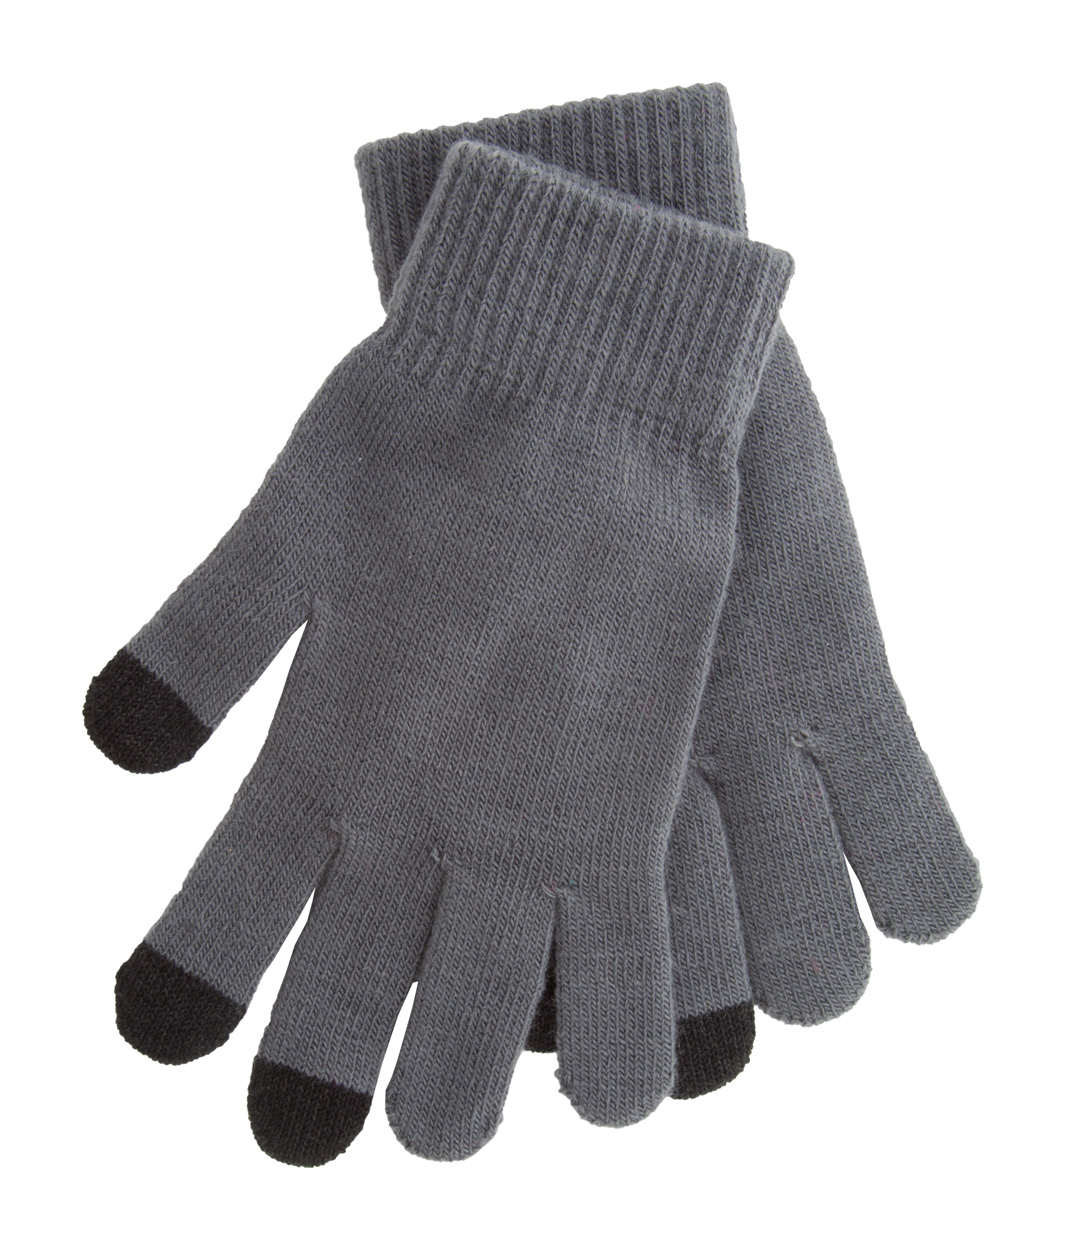 Winter gloves ACTIUM for touchscreen control